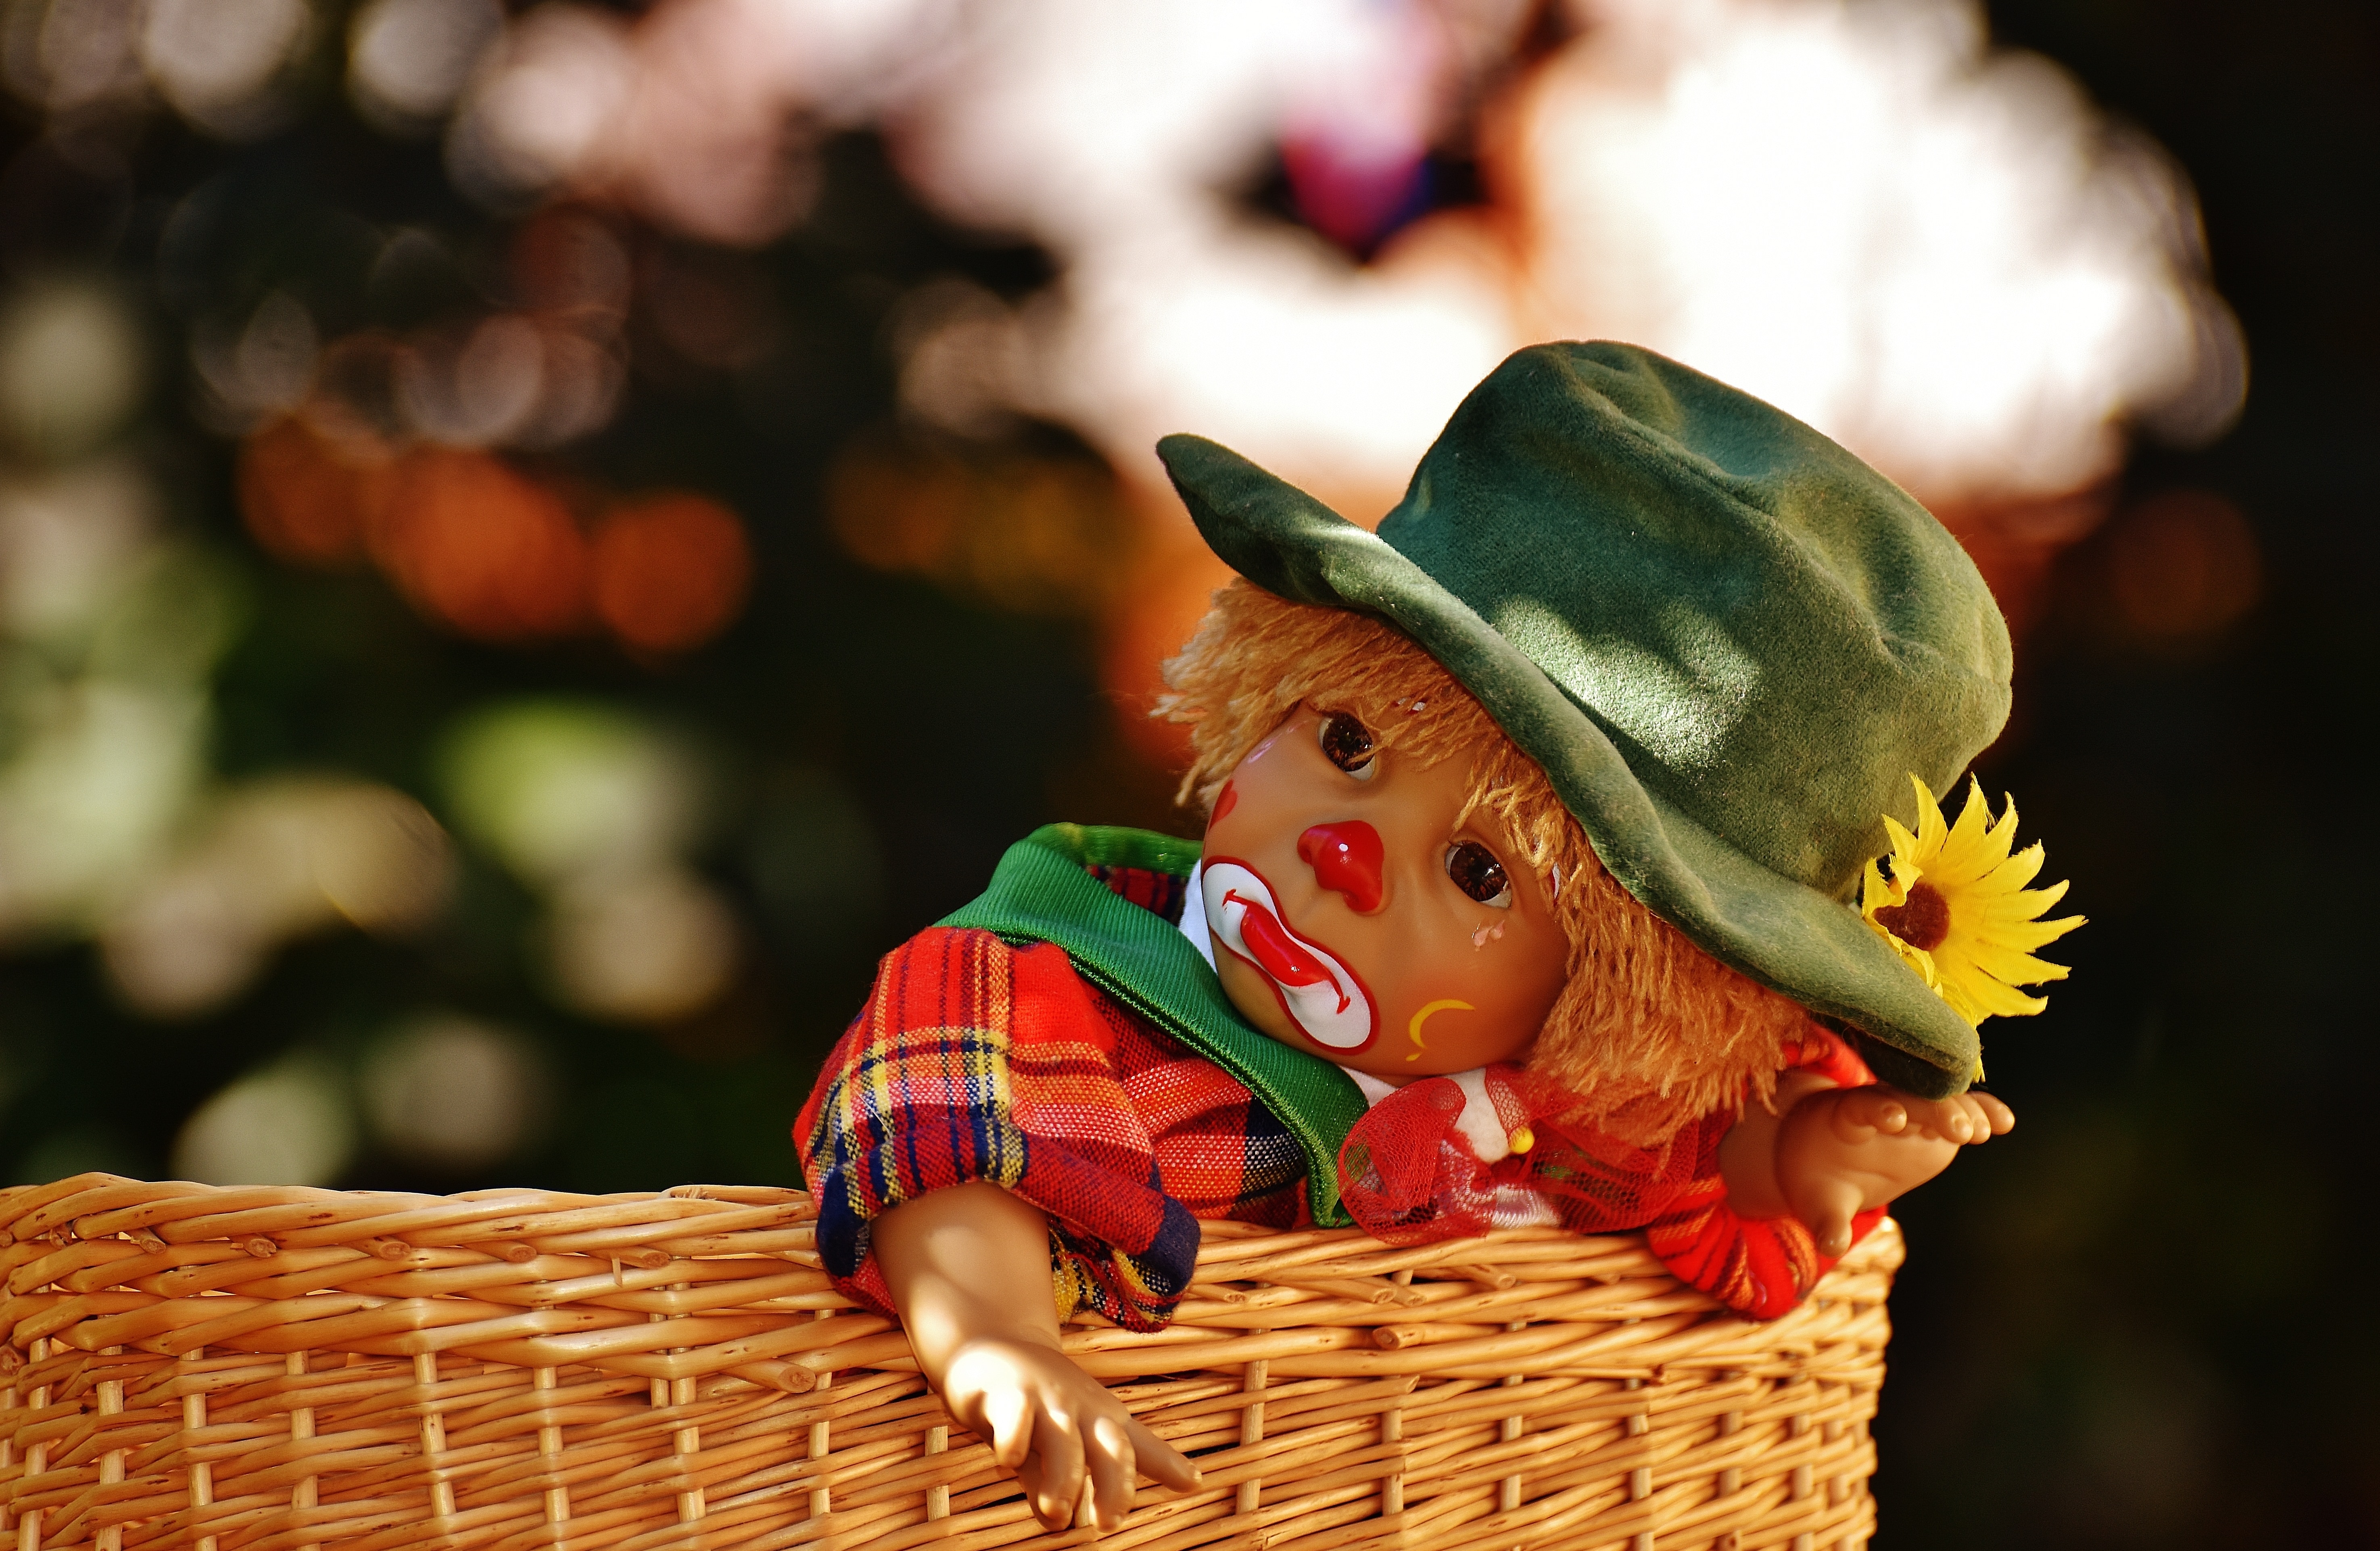 clown doll in wicker basket in close up photography